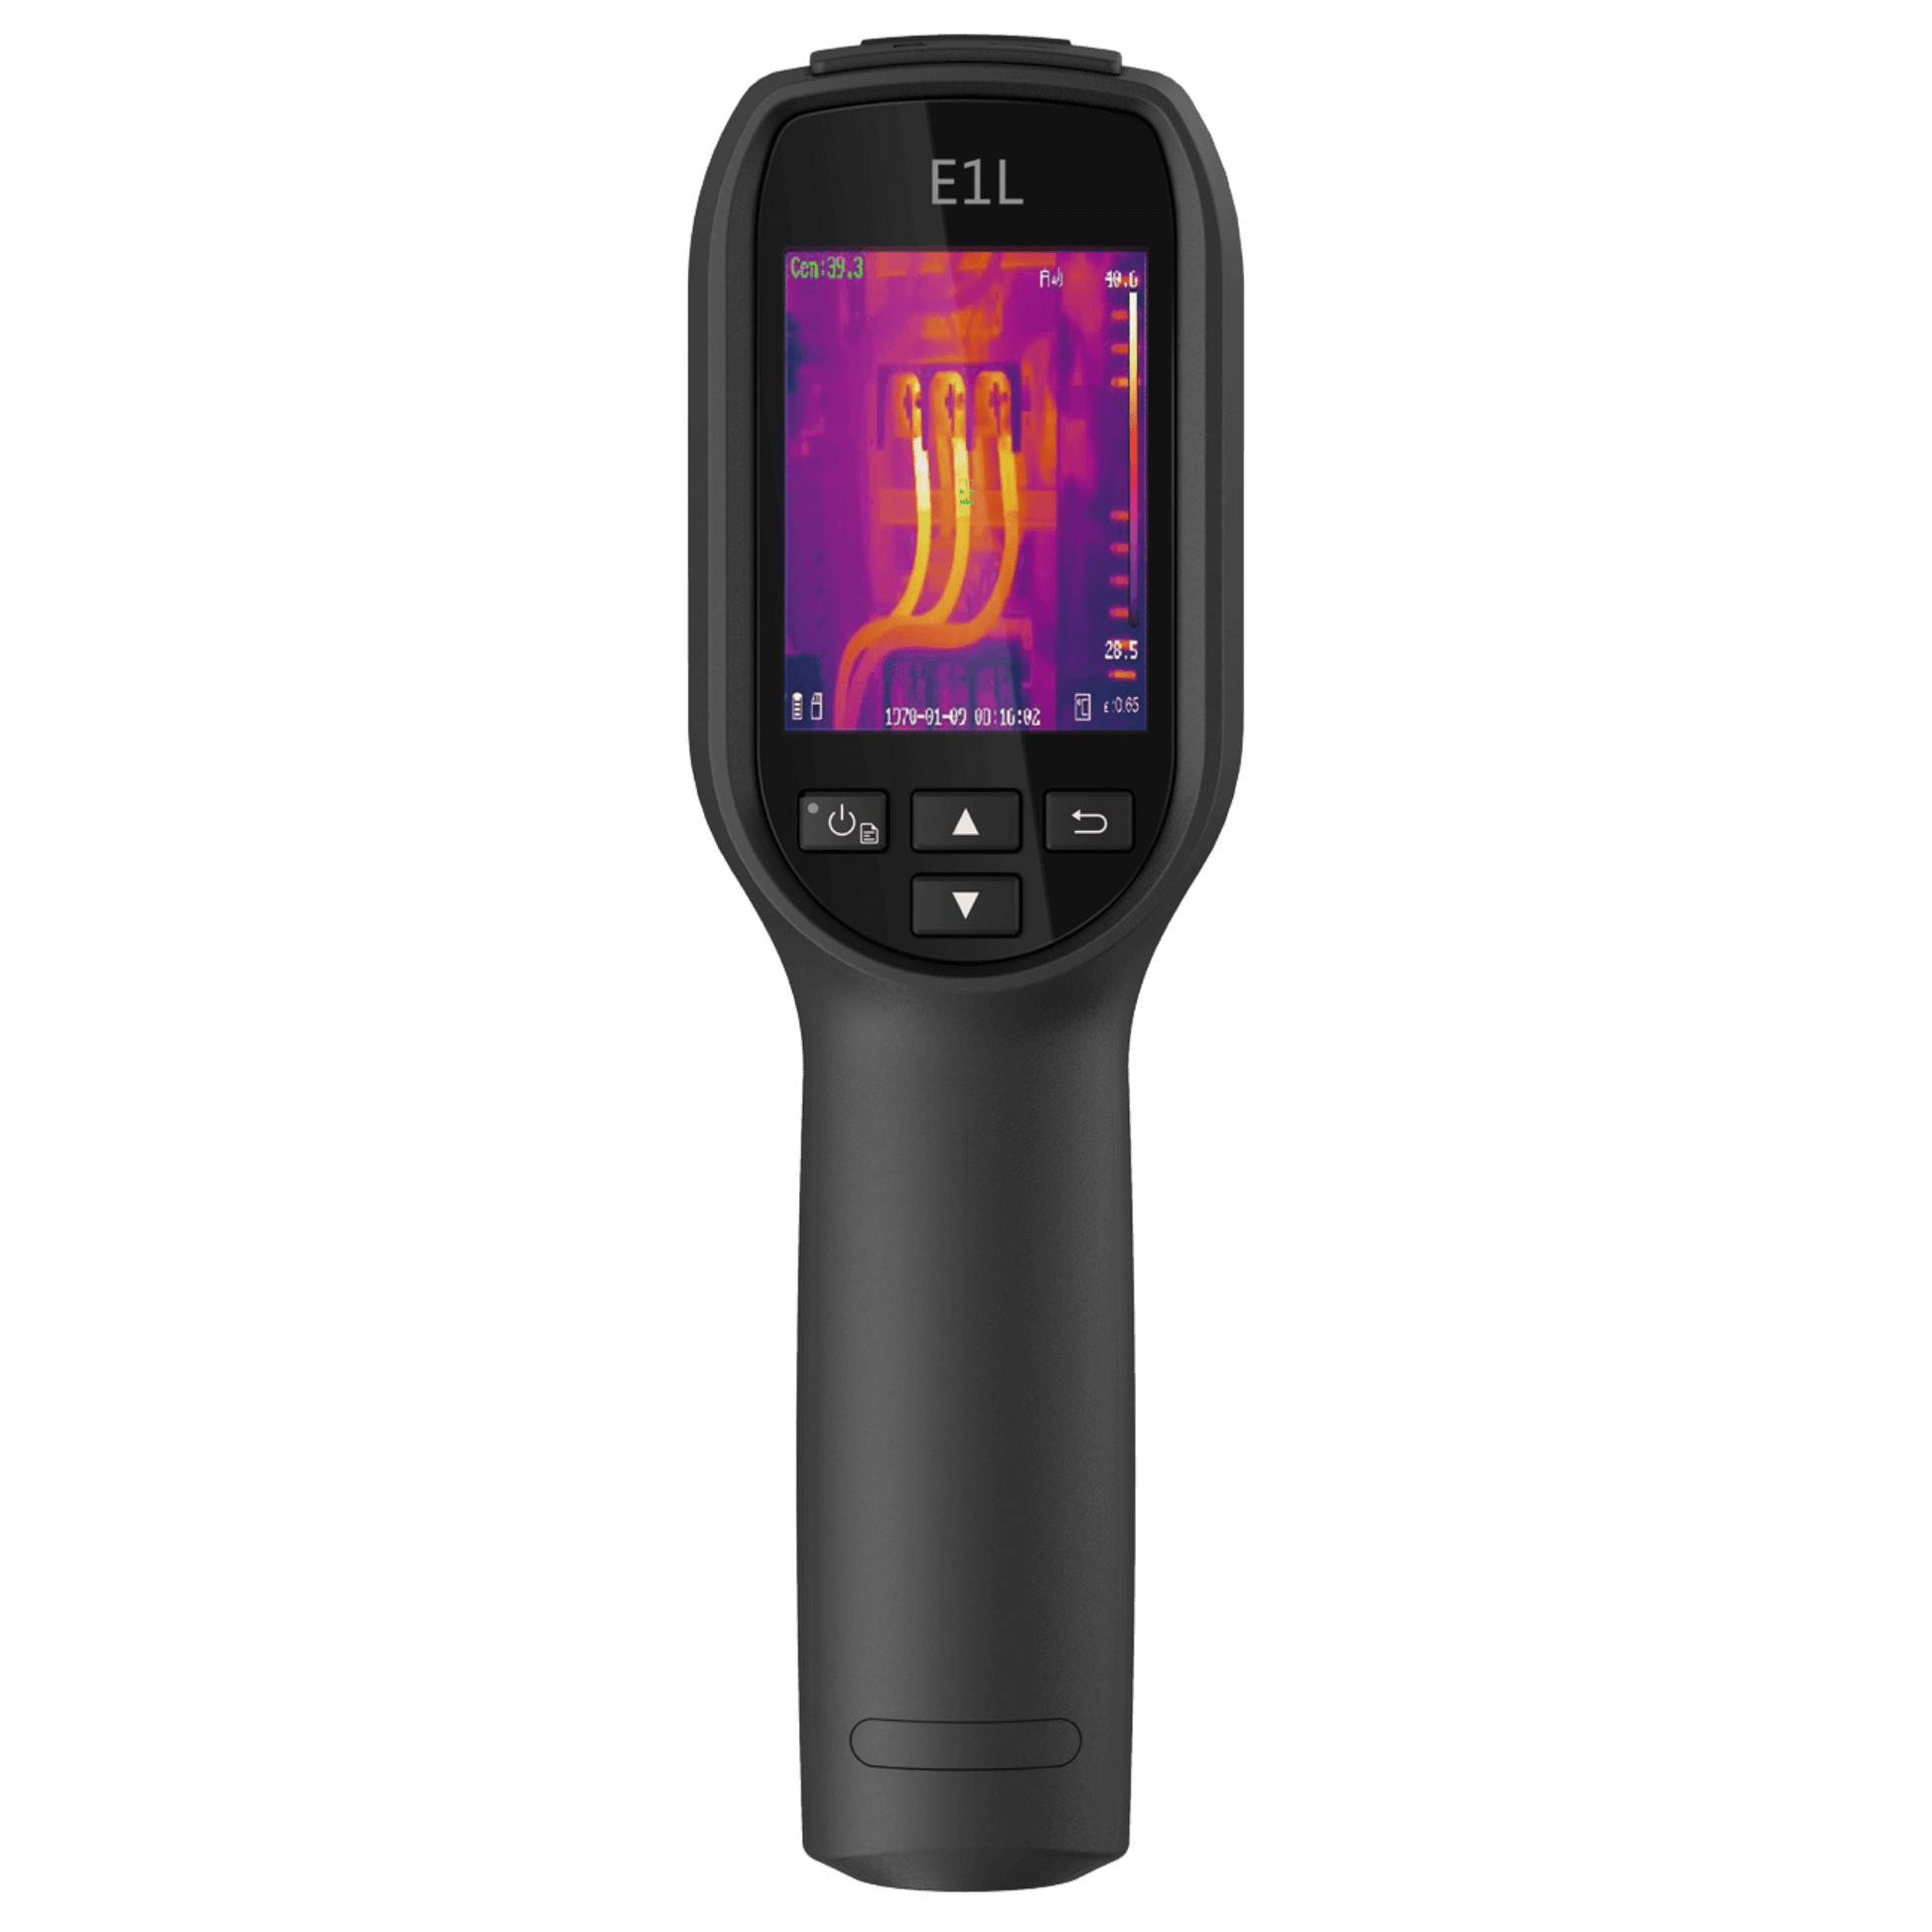 HikMicro E1L Handheld Thermal Camera Rear View of Screen and Buttons